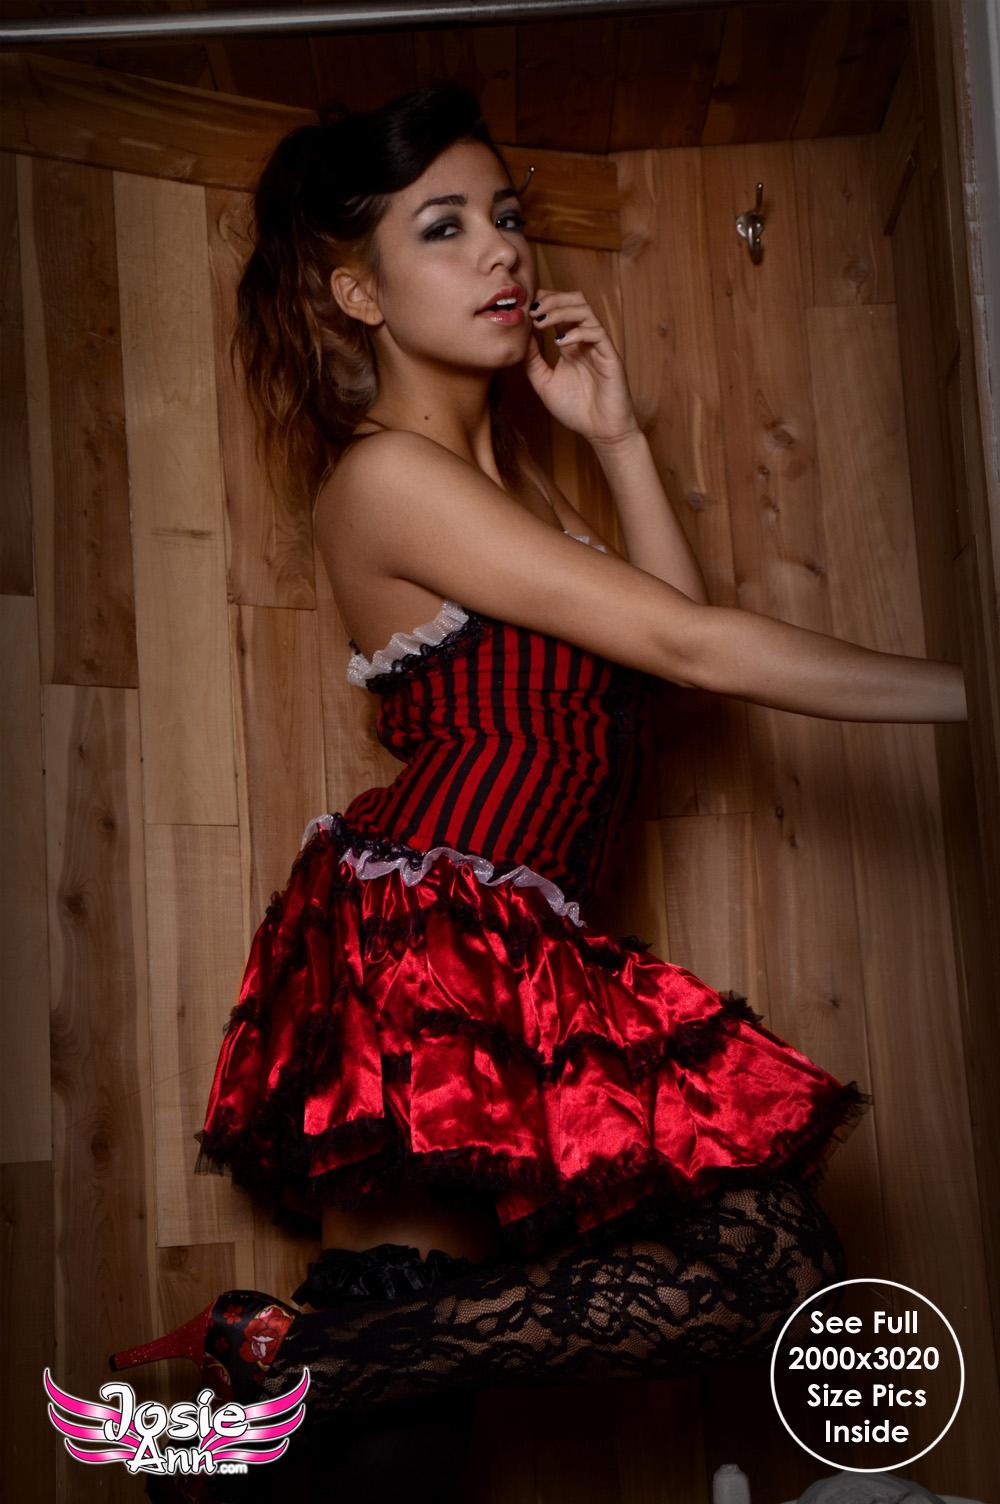 Josie Ann wants to give you a sensual set with a feel of the old west #55646514